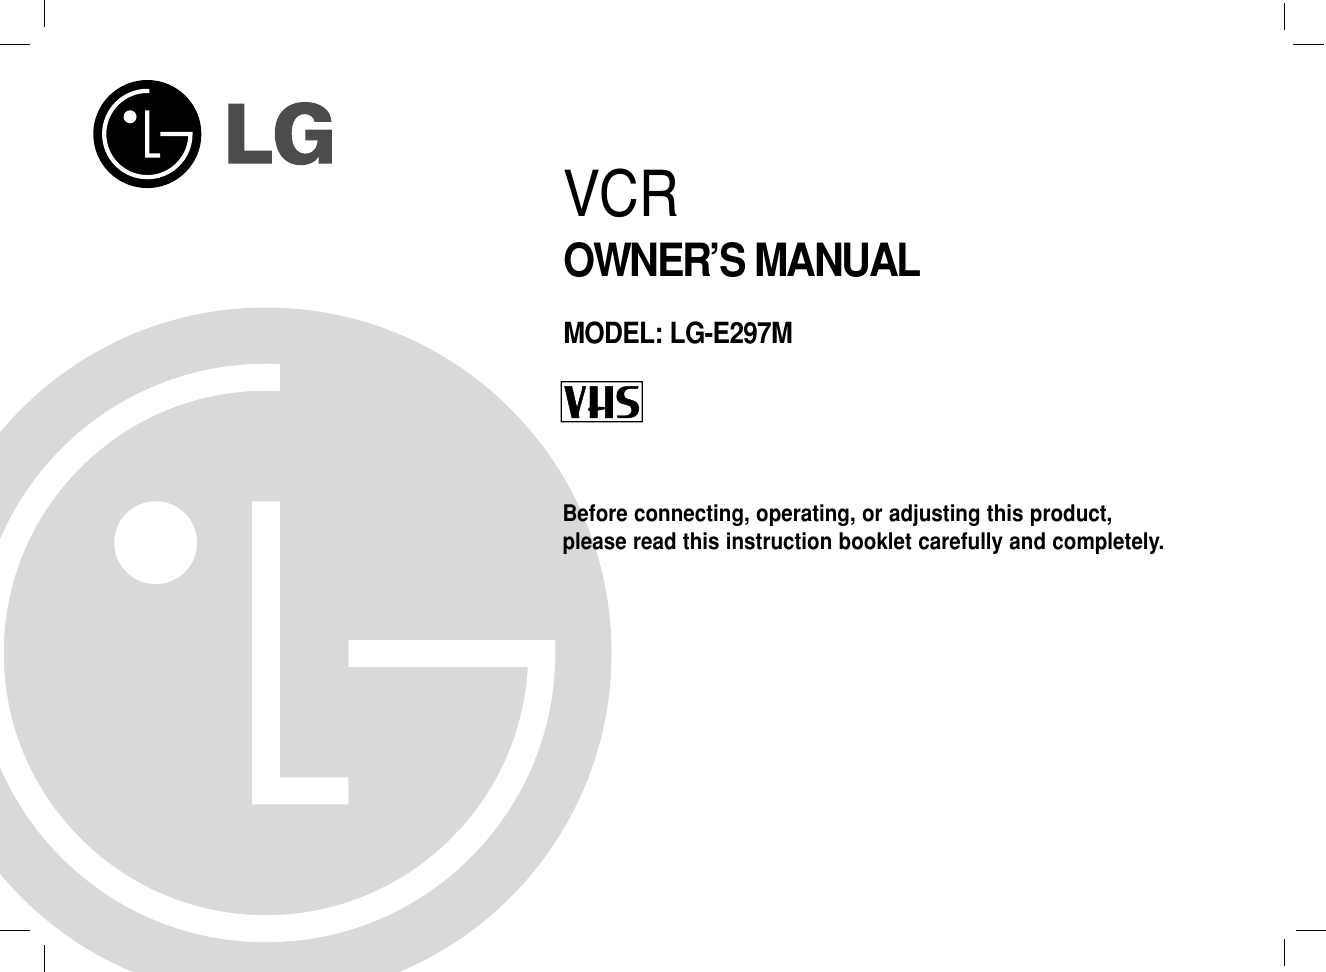 Before connecting, operating, or adjusting this product, please read this instruction booklet carefully and completely.VCROWNER’S MANUALMODEL: LG-E297M